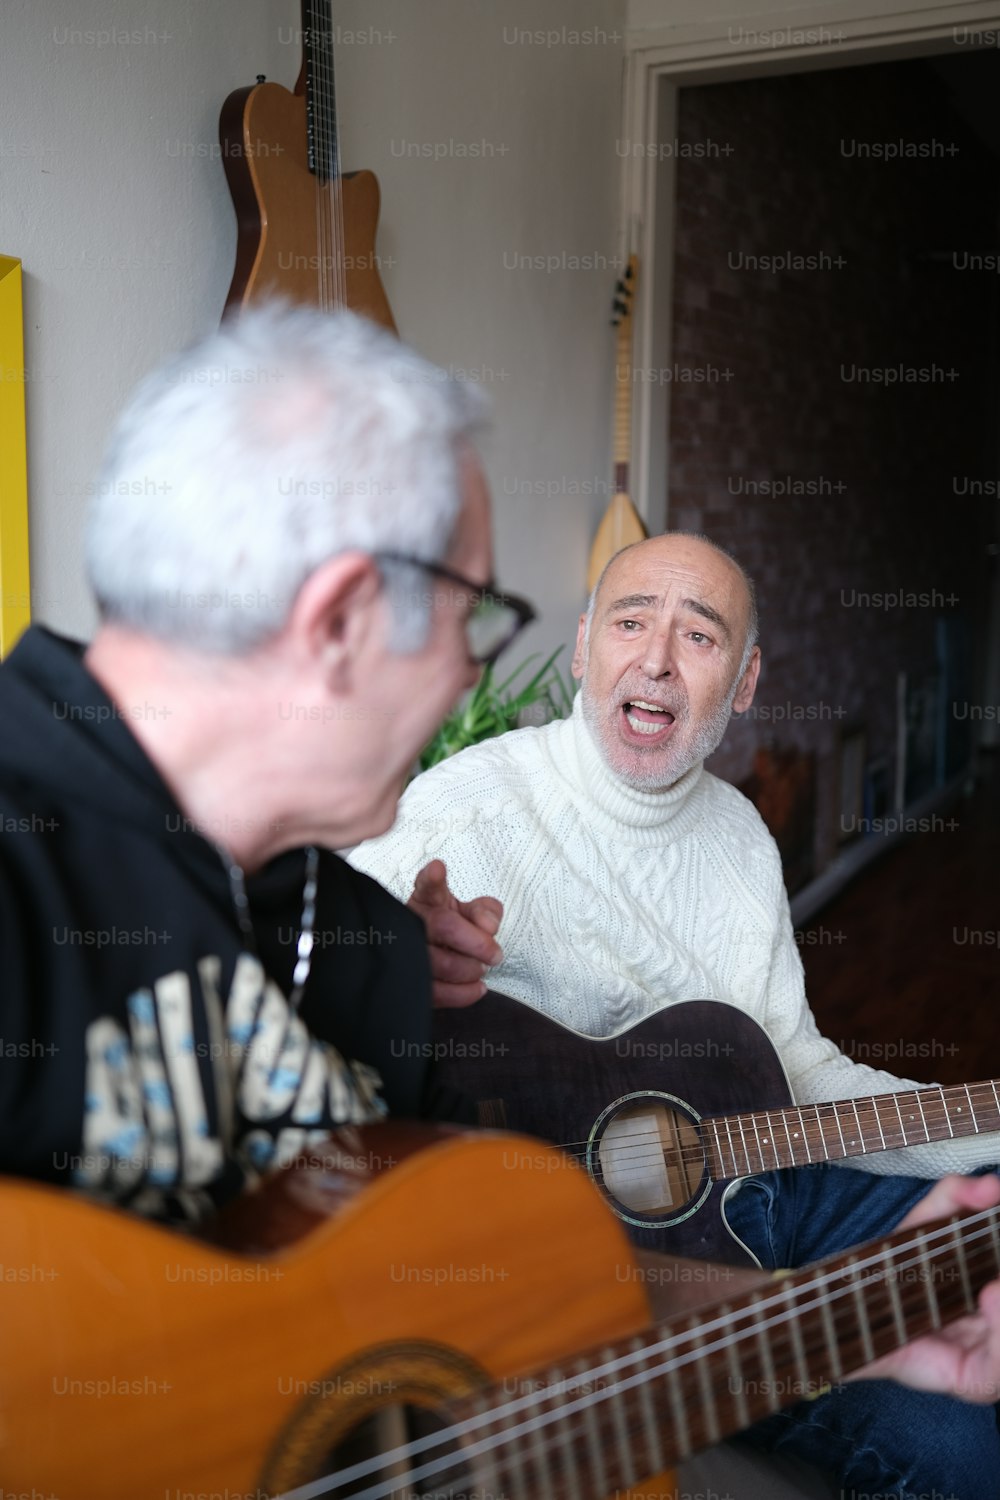 a man playing a guitar while another man watches